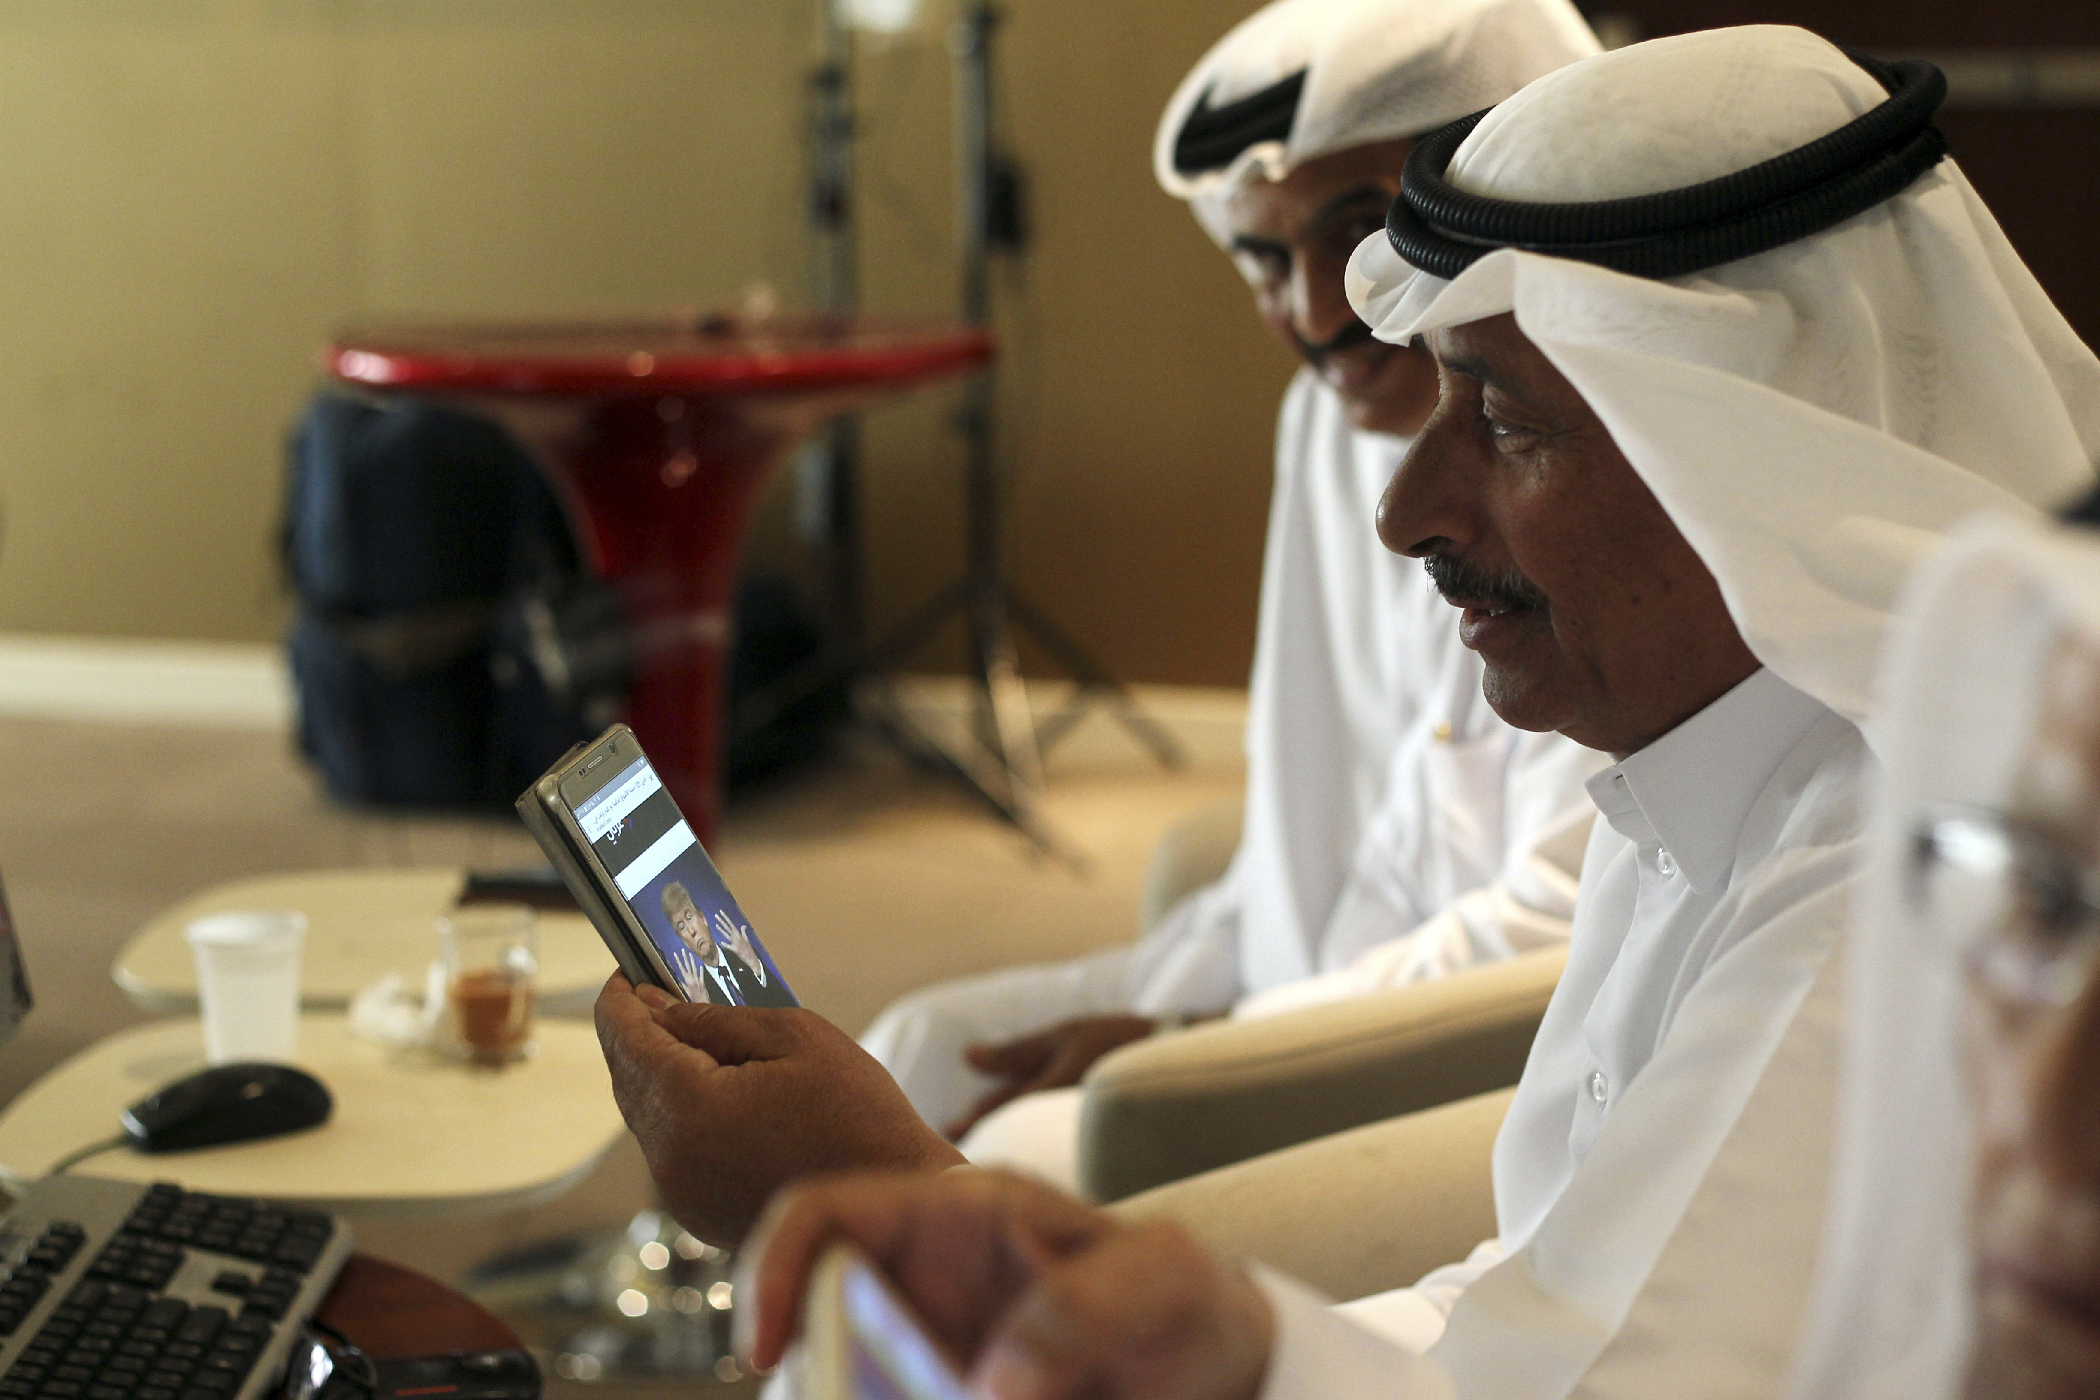 Gulf State markets -- such as the Qatar Stock Exchange being monitored by a trader shown here -- fell after news of the Trump victory. These markets are heavily exposed to changes in the oil market, and Trump has promised to make America an even bigger <a href="http://fortune.com/2016/11/09/opec-oil-prices-donald-trump/" target="_blank">fuel and oil</a> producer.